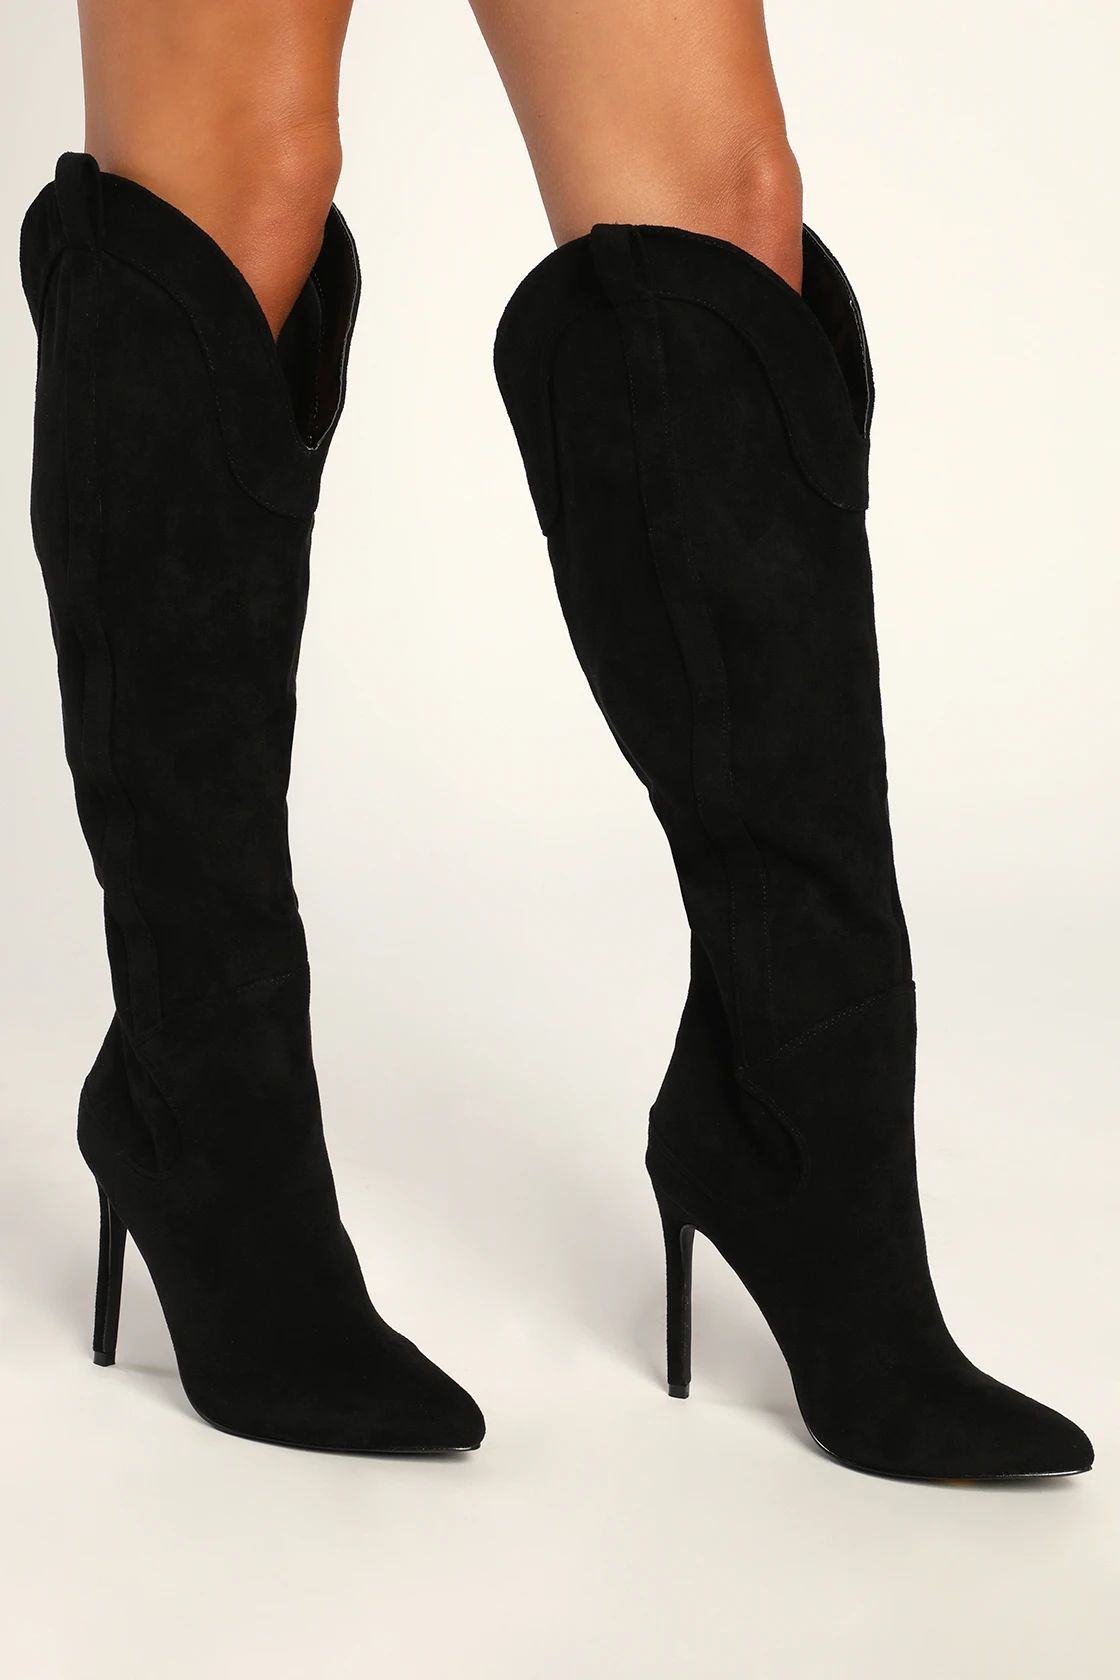 Sayyna Black Suede Pointed-Toe Knee-High Boots | Lulus (US)